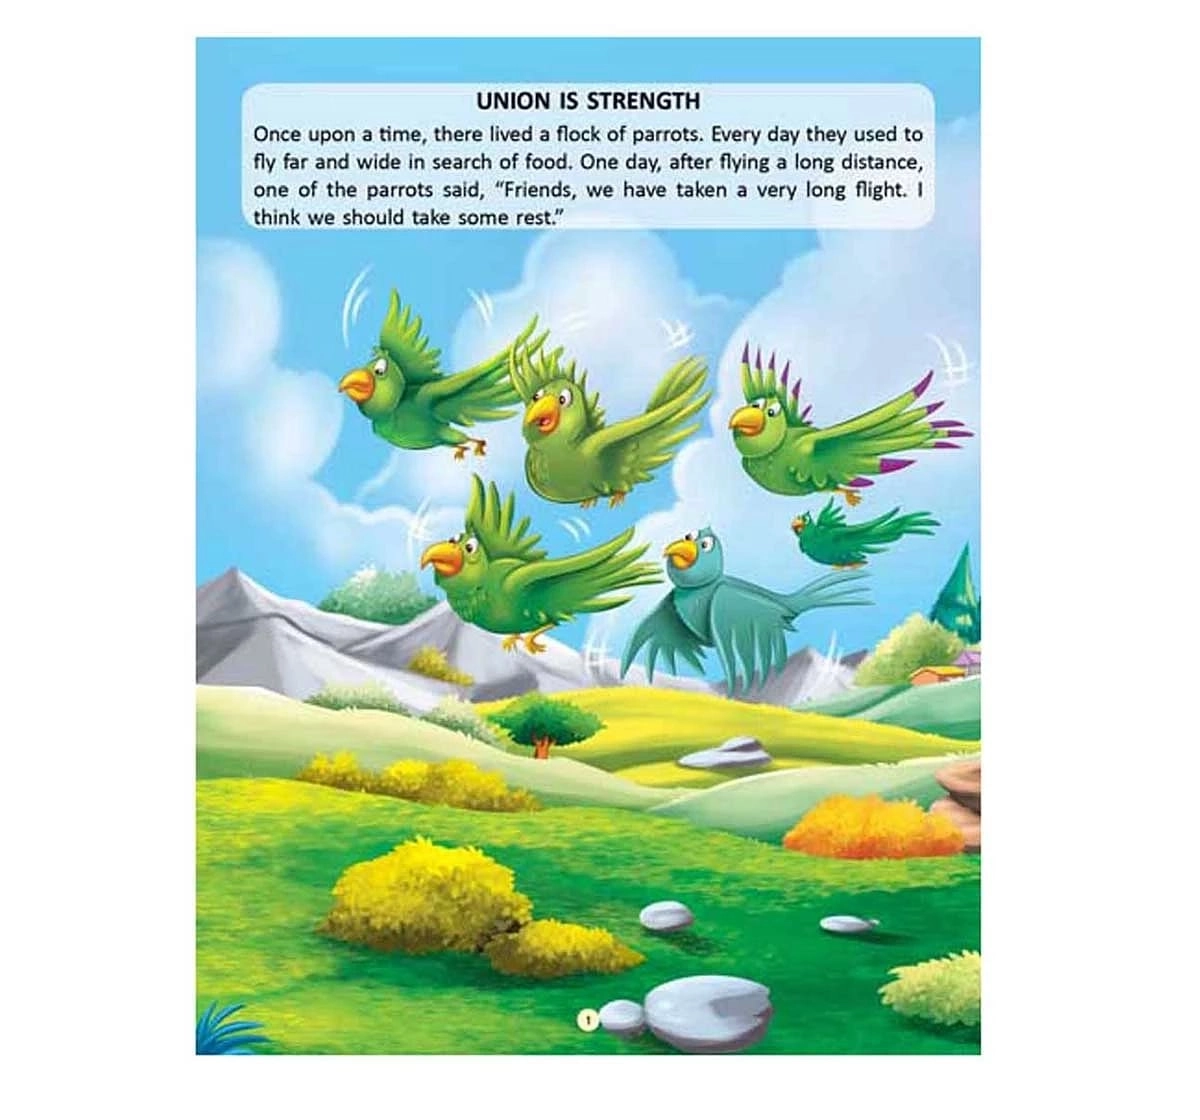 Dreamland Paper Back Union Is Strength Famous Moral Story Books for kids 4Y+, Multicolour